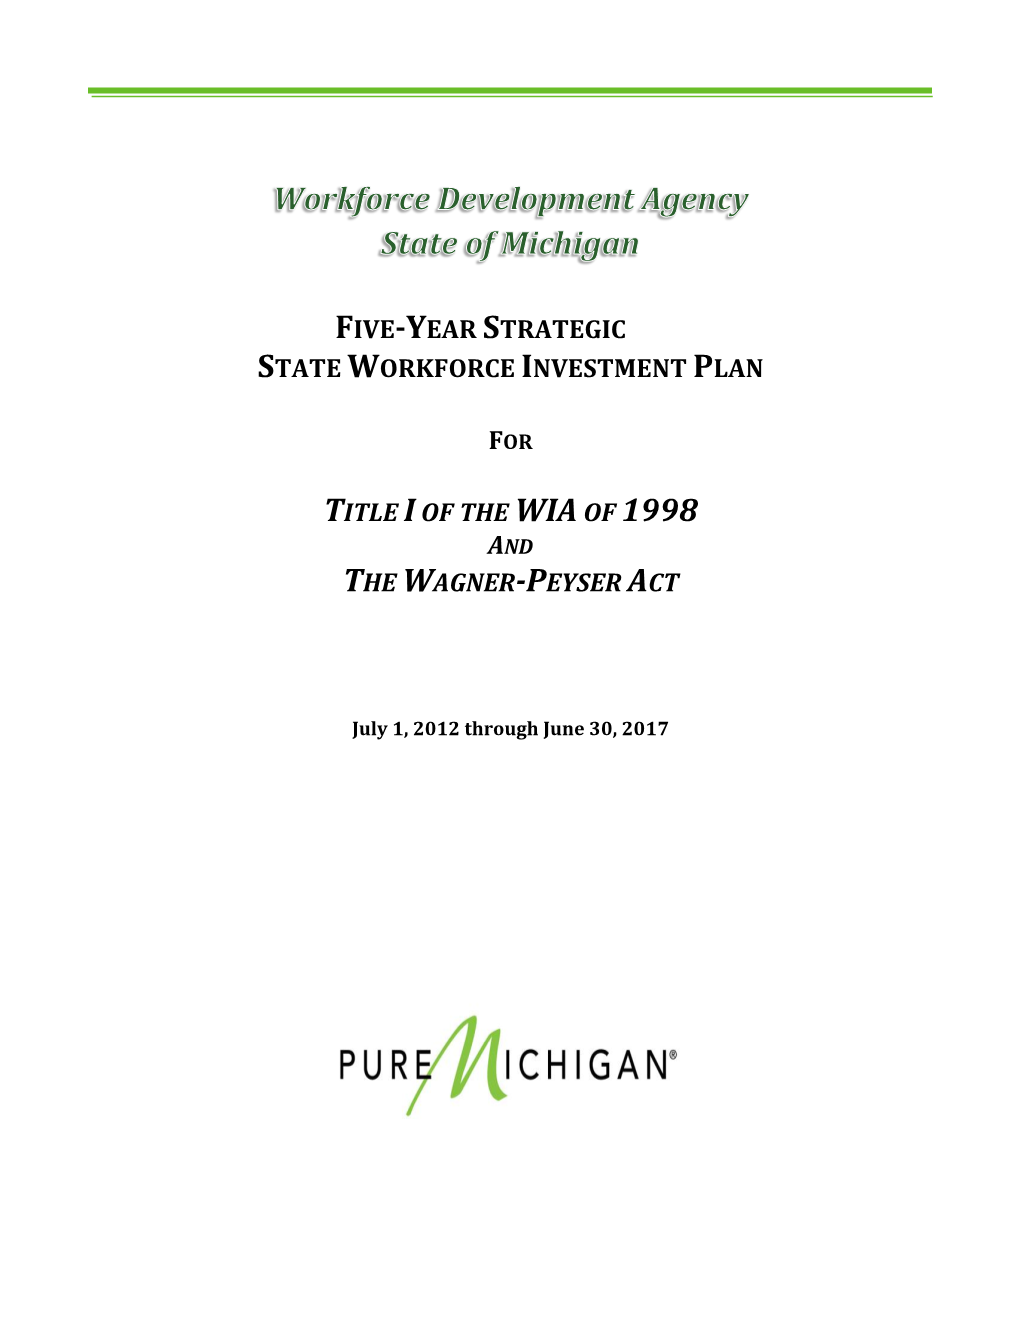 Five-Year Strategic State Workforce Investment Plan Title Iof the Wiaof 1998 the Wagner-Peyser